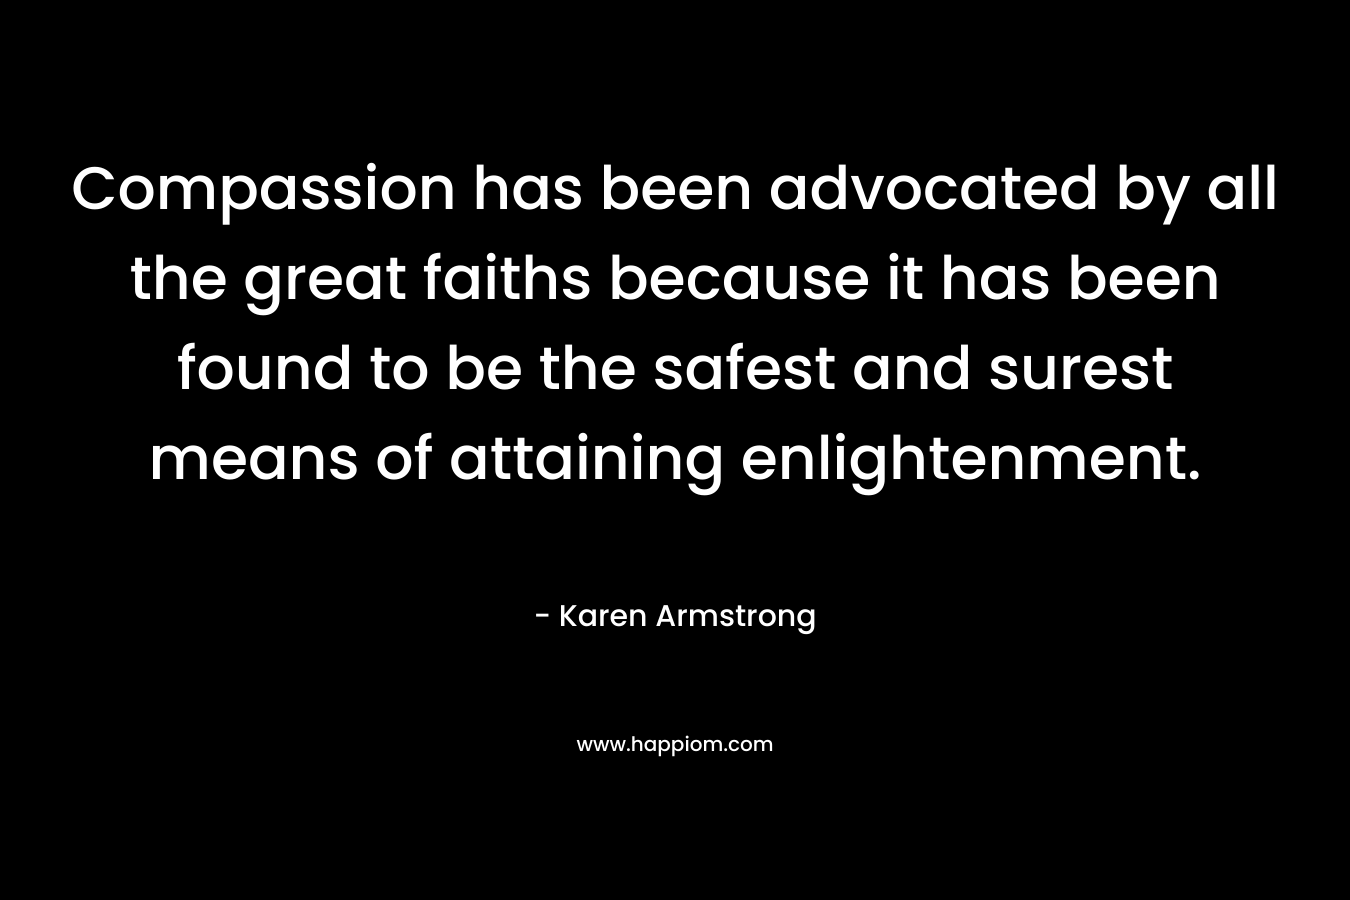 Compassion has been advocated by all the great faiths because it has been found to be the safest and surest means of attaining enlightenment. – Karen Armstrong